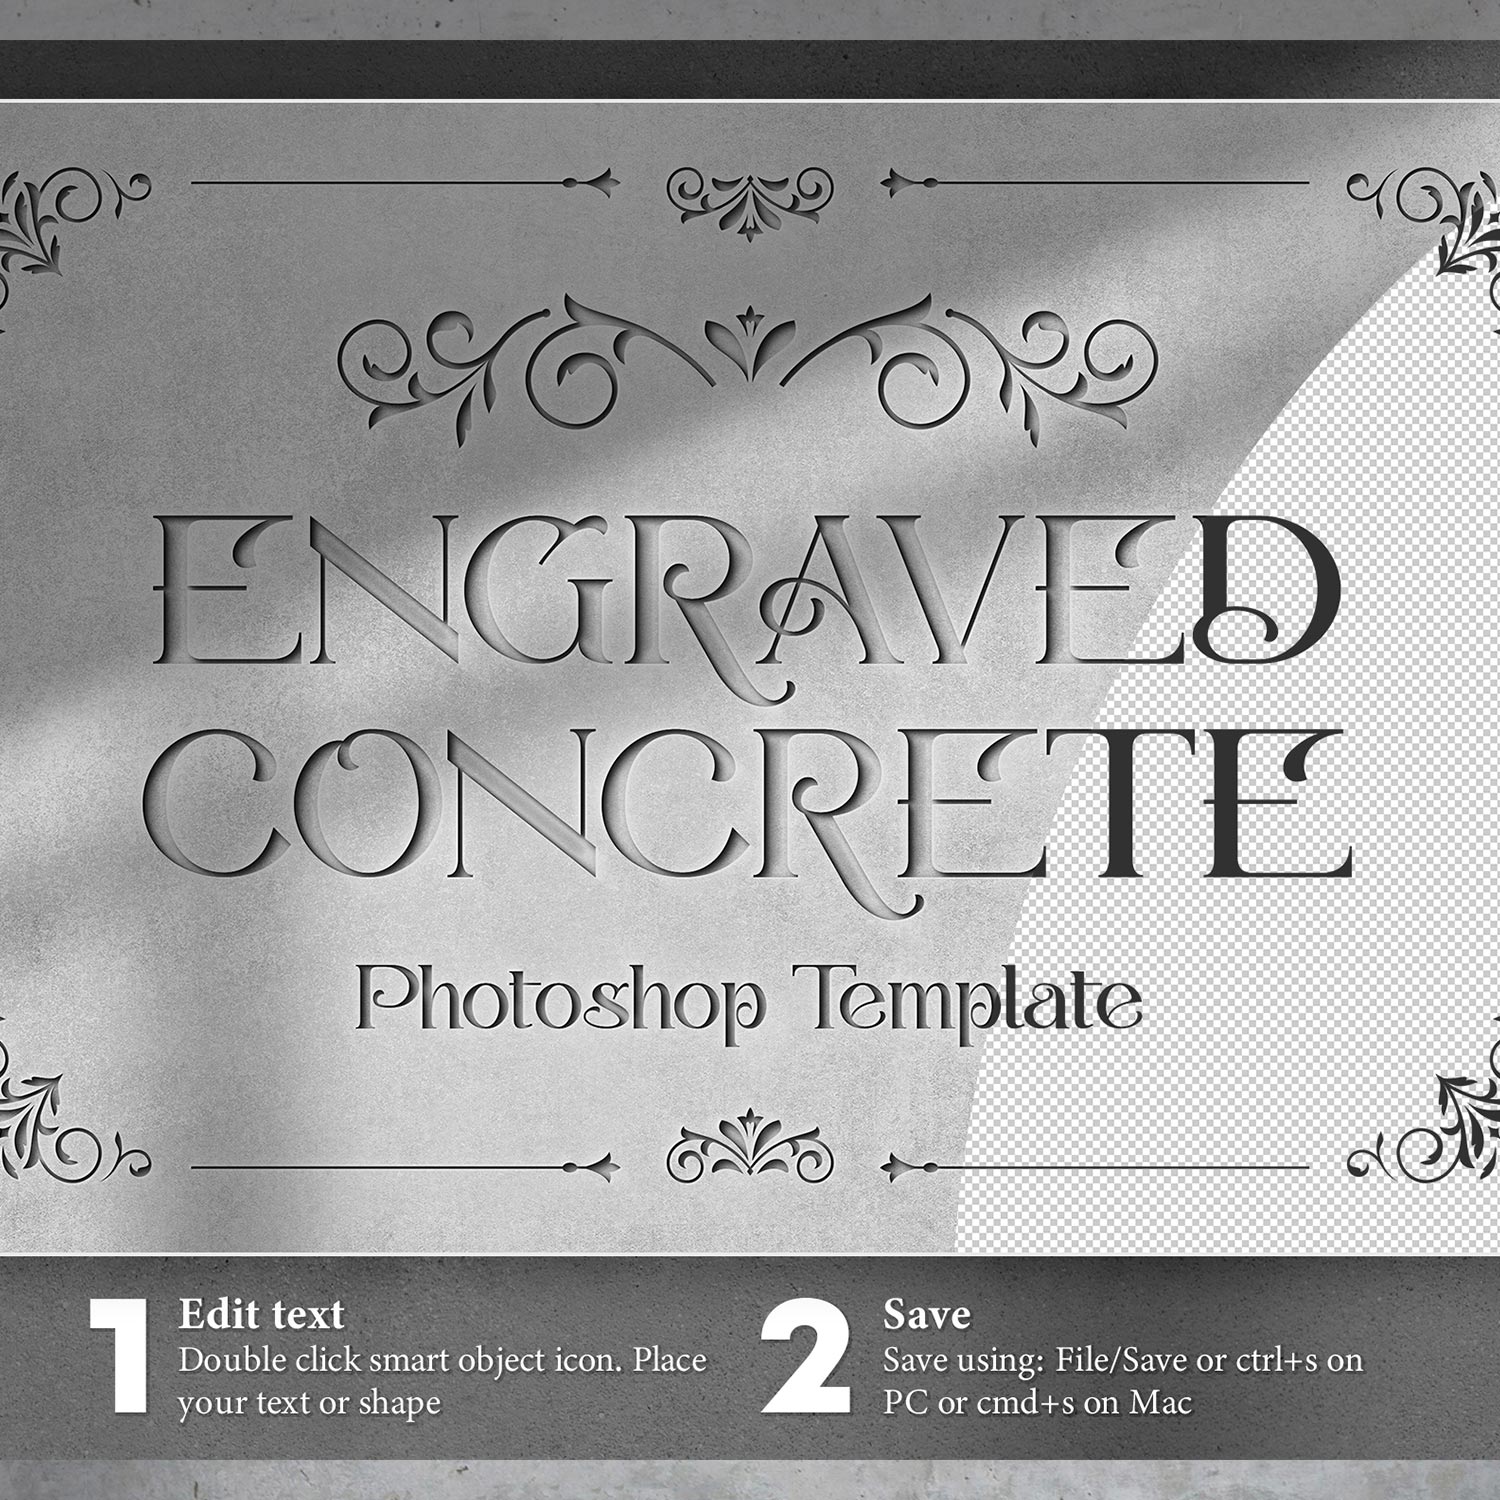 Engraved Concrete Template preview image.